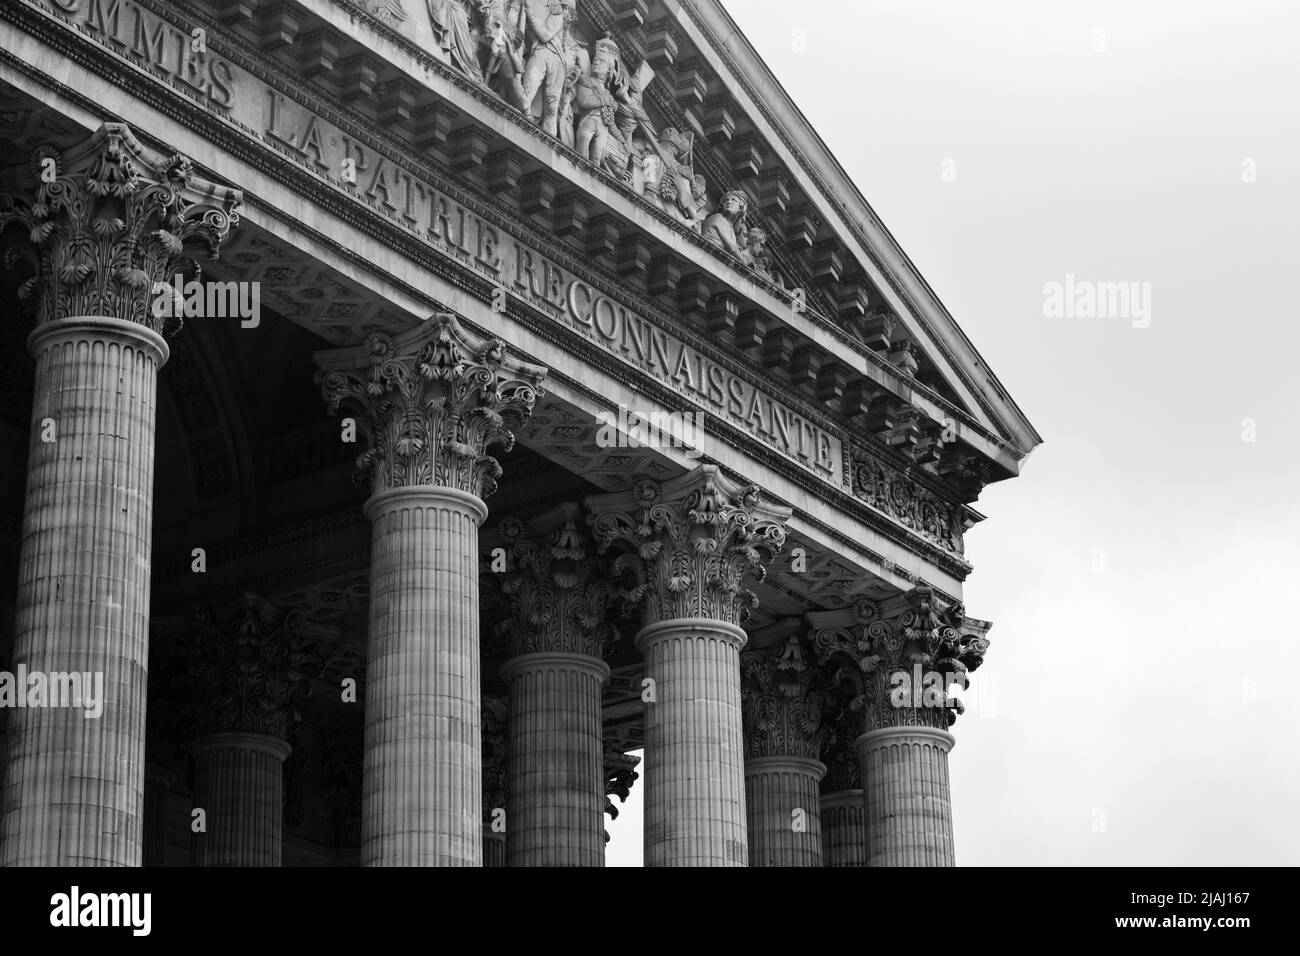 Black and white image of the pediment from the Pantheon in Paris, France.  Showing just the top corner of roof and a few of the columns. Stock Photo